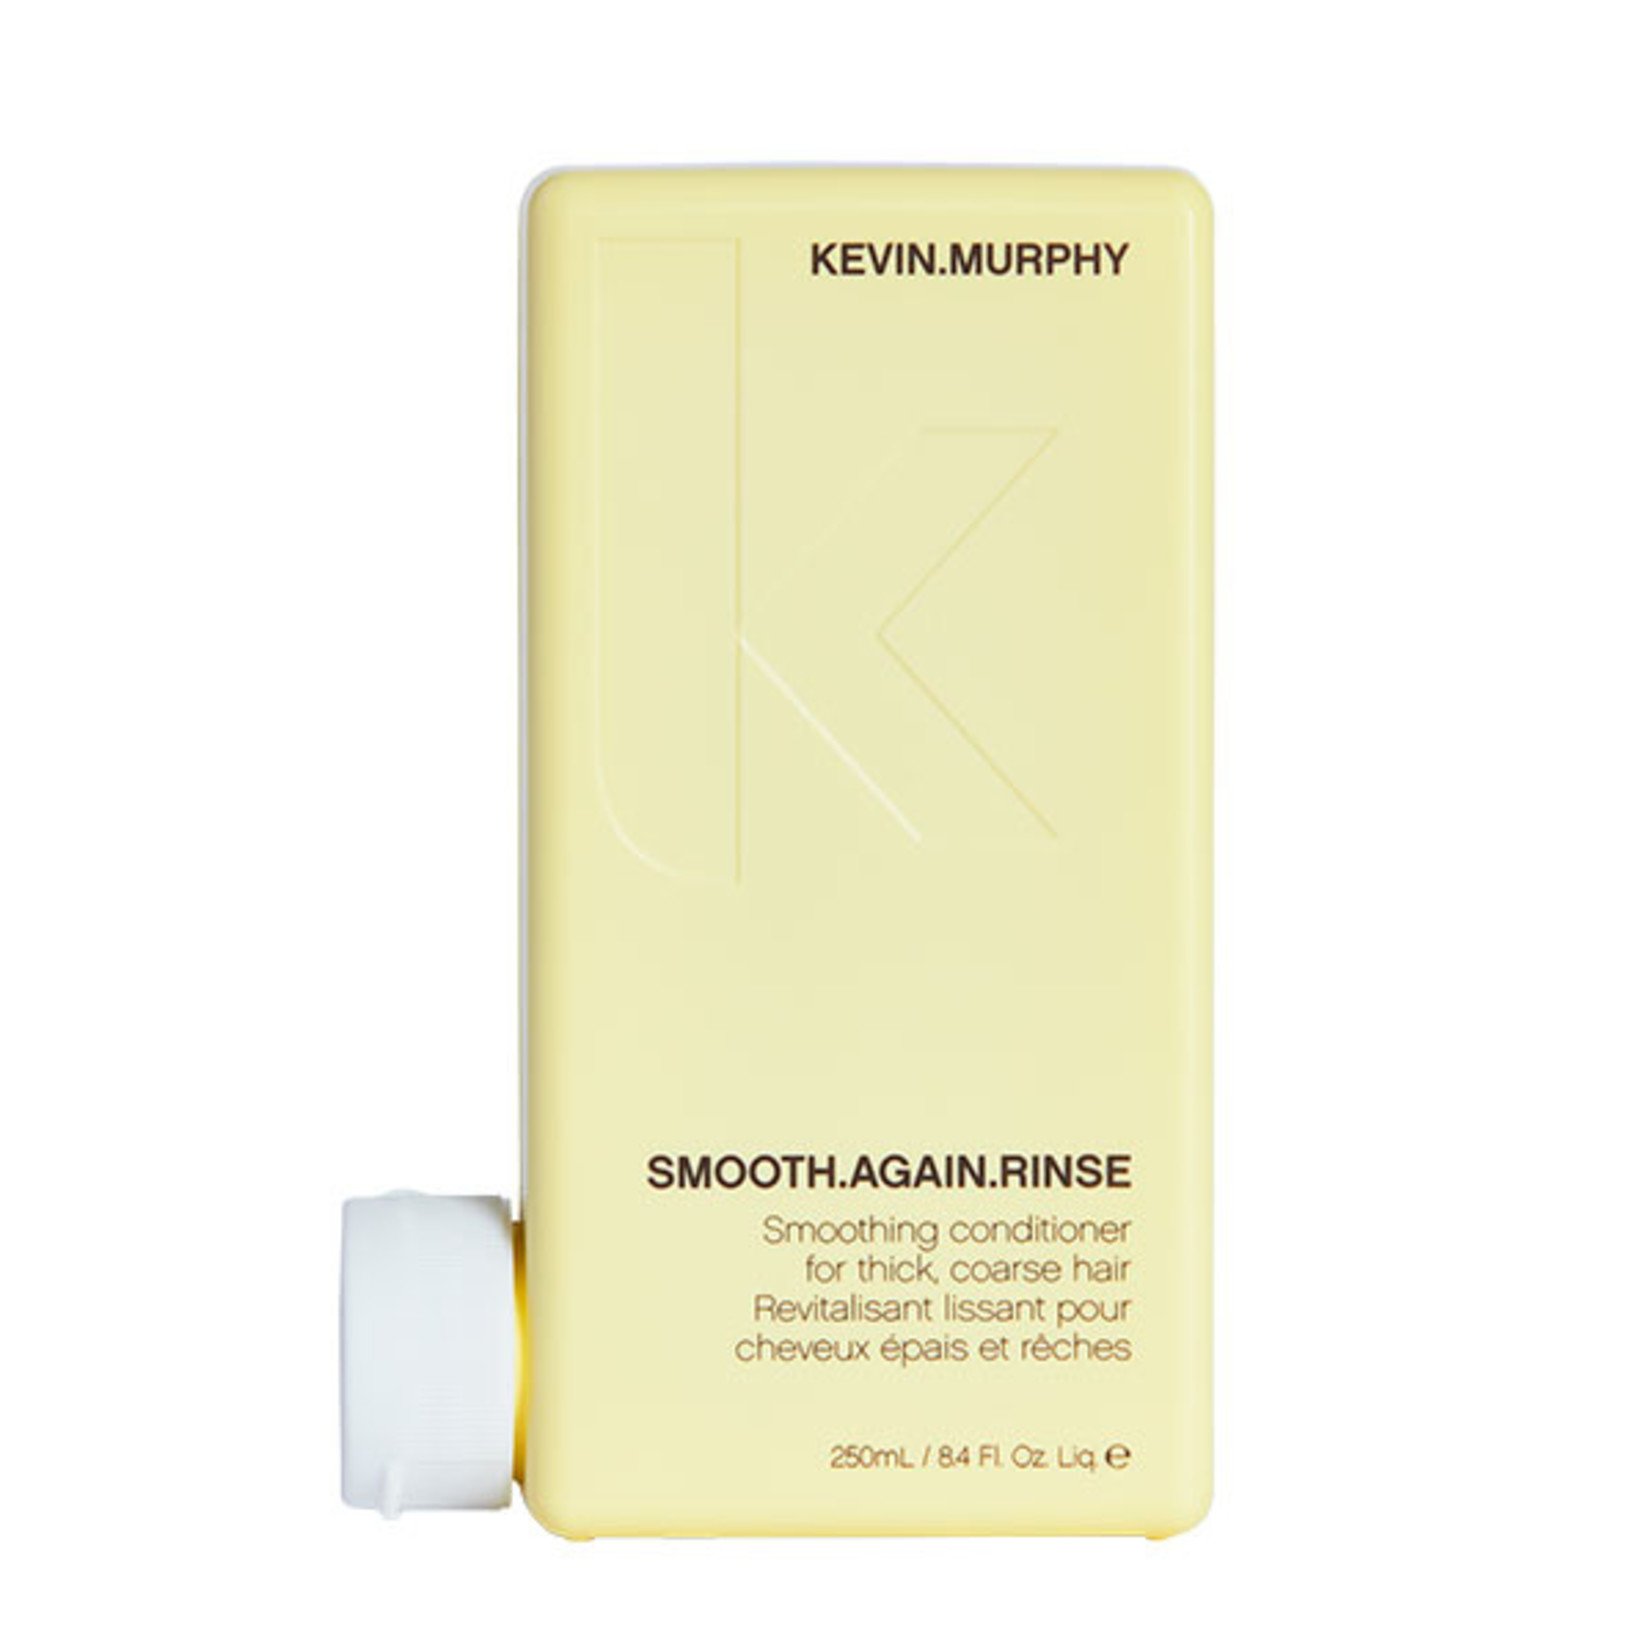 KEVIN.MURPHY KEVIN.MURPHY SMOOTH.AGAIN.RINSE 8.4 oz